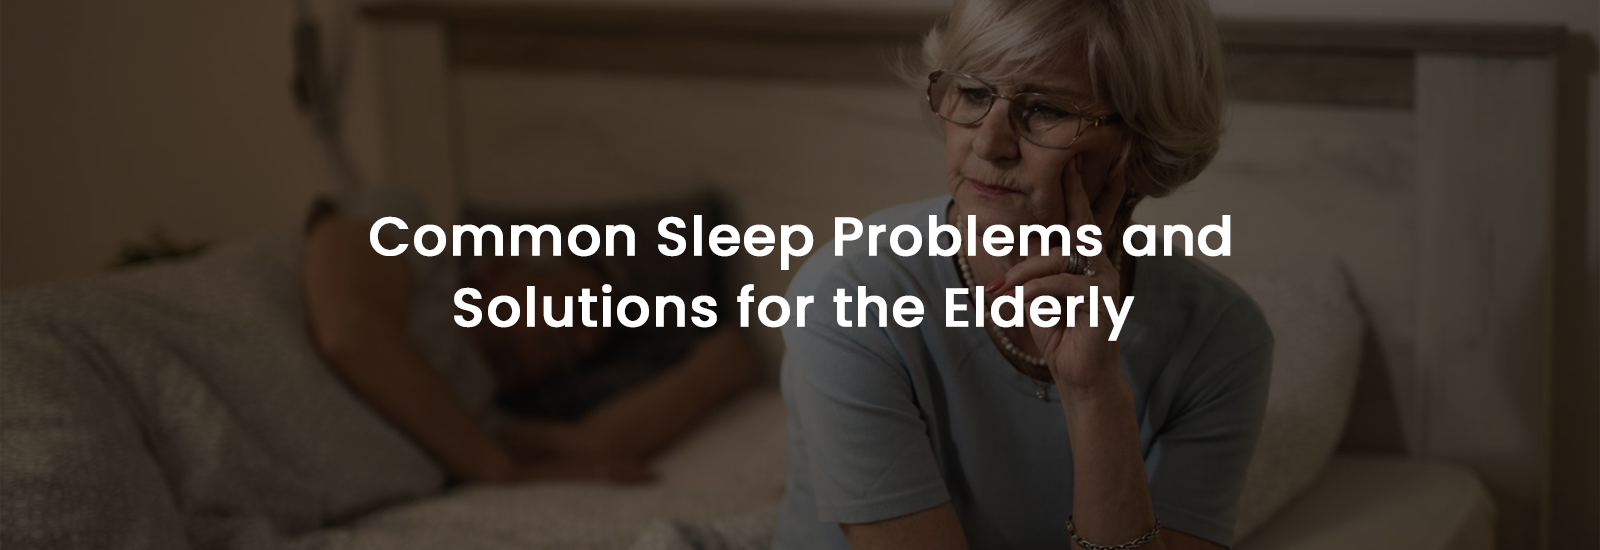 Common Sleep Problems and Solutions for the Elderly | Banner Image